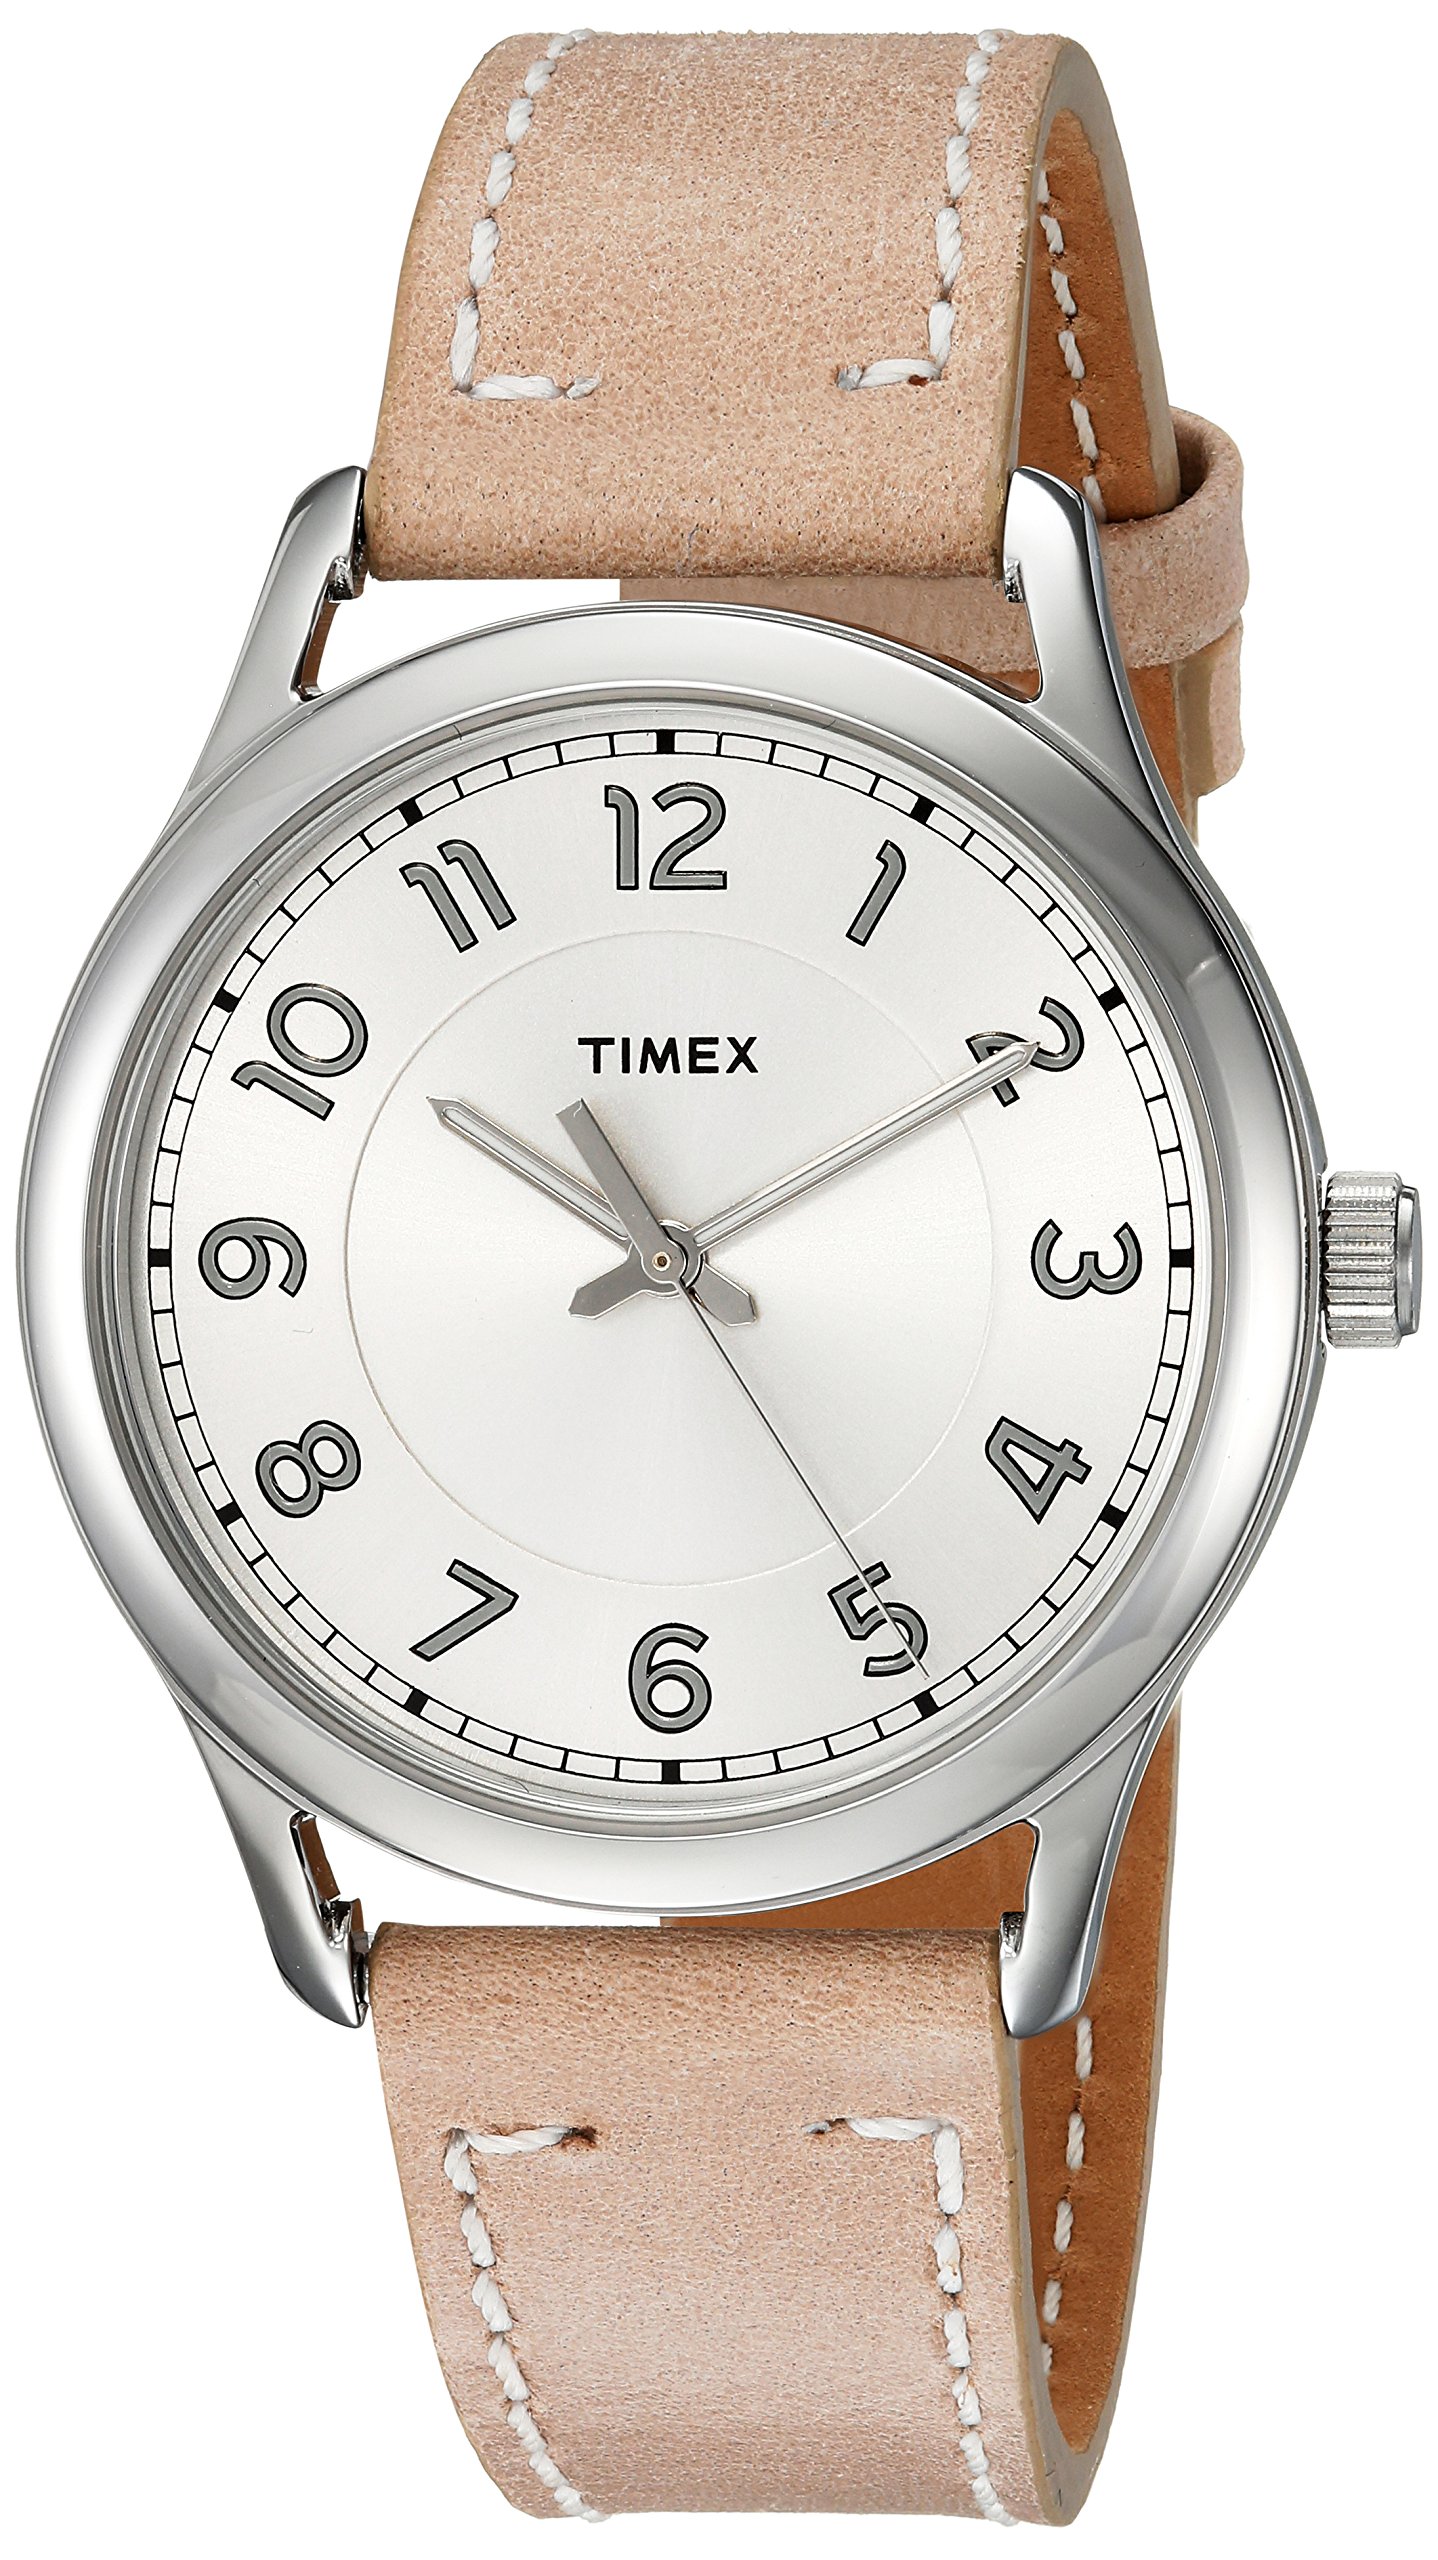 Timex Womens New England Sand/Silver Leather Strap Watch TW2R23200 - (Open Box)